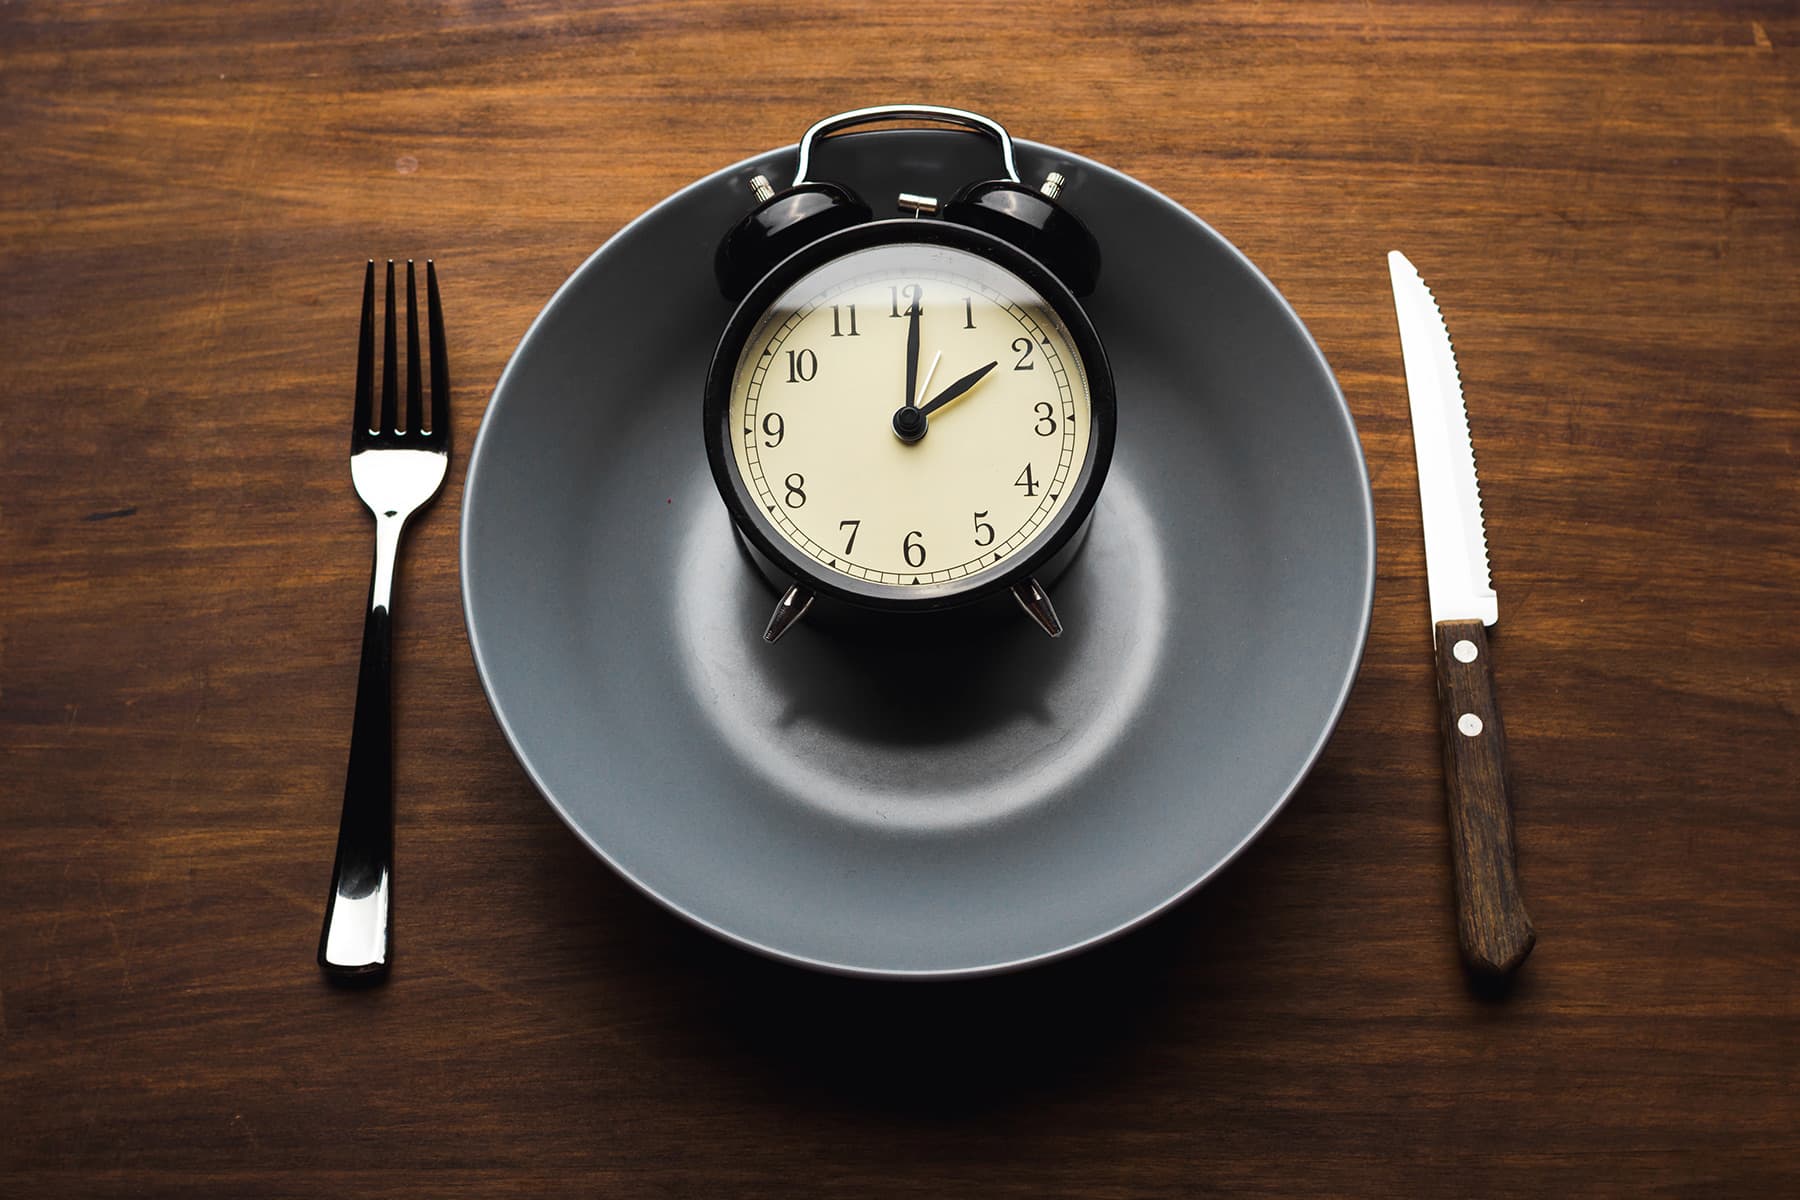 Intermittent Fasting May Hold Keys to Diabetes Treatment